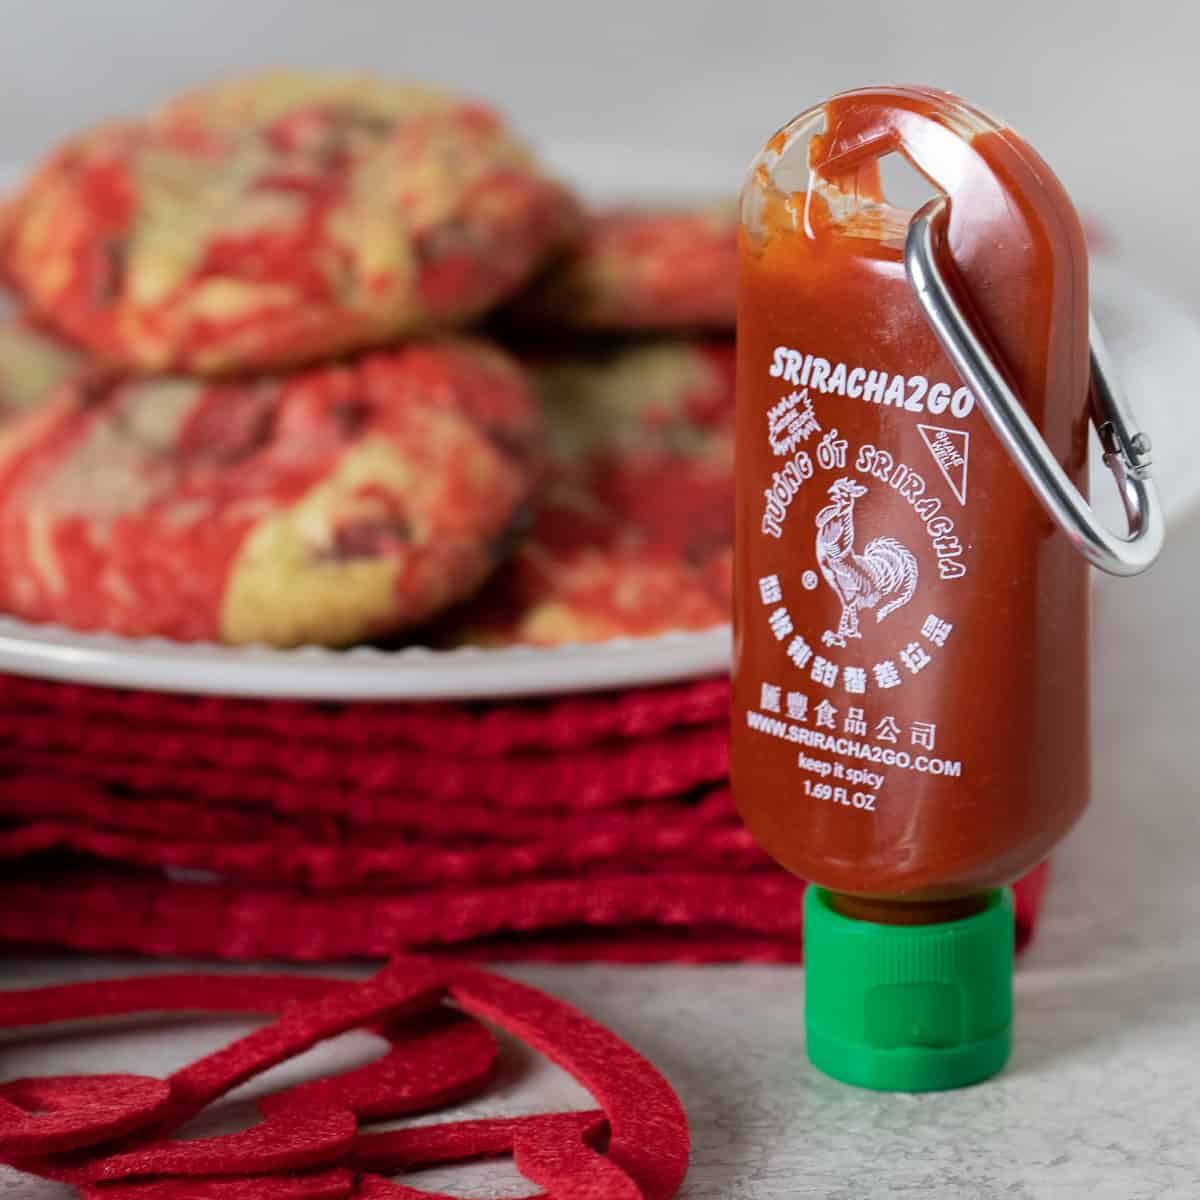 A close up picture of a bottle of Sriracha in front of a plate of chocolate chip cookies.